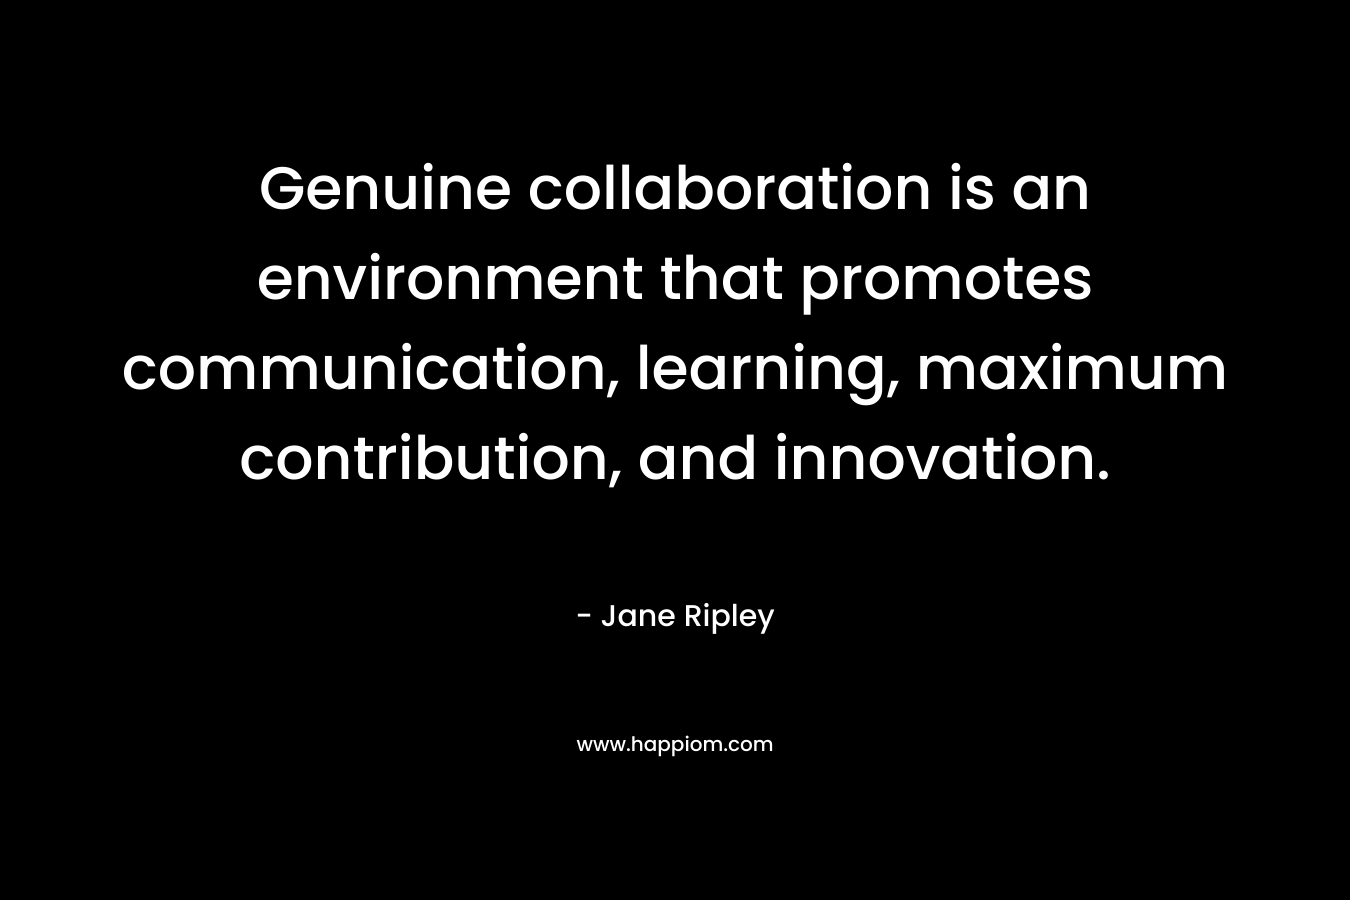 Genuine collaboration is an environment that promotes communication, learning, maximum contribution, and innovation.